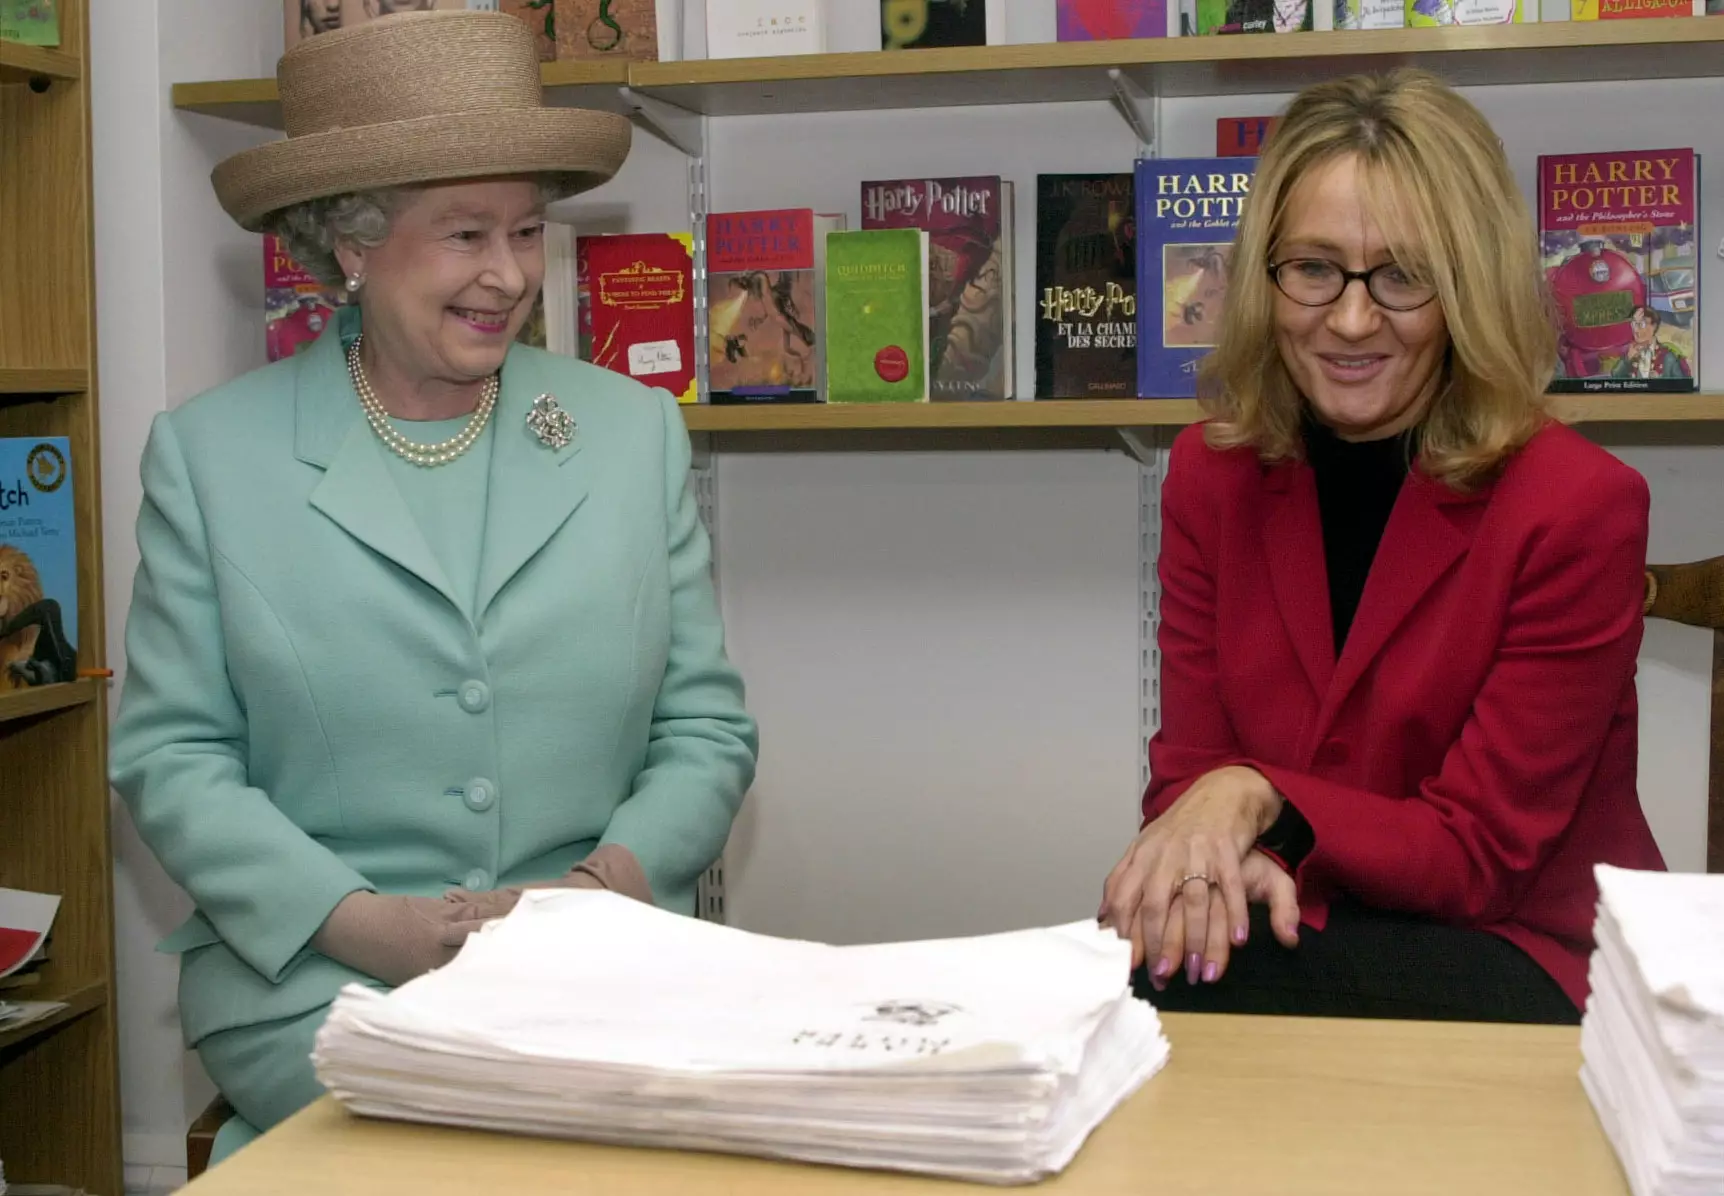 JK Rowling with the queen